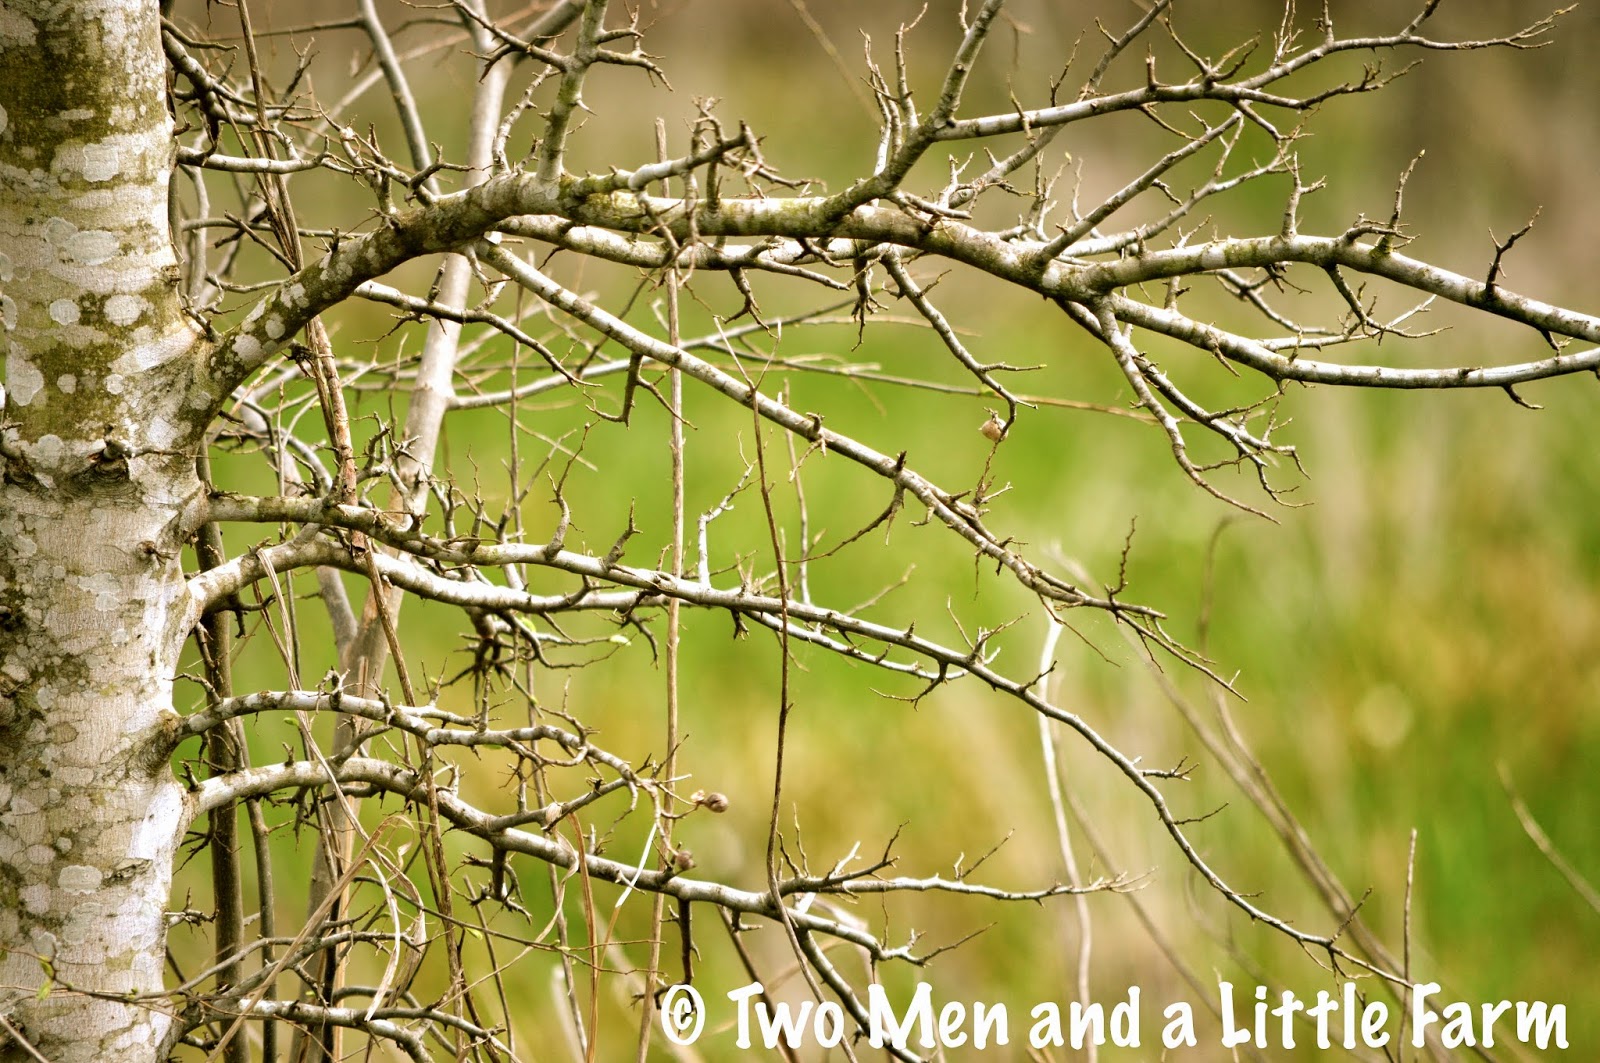 Two Men and a Little Farm: ARTISTIC TREE BRANCHES AT THE FARM